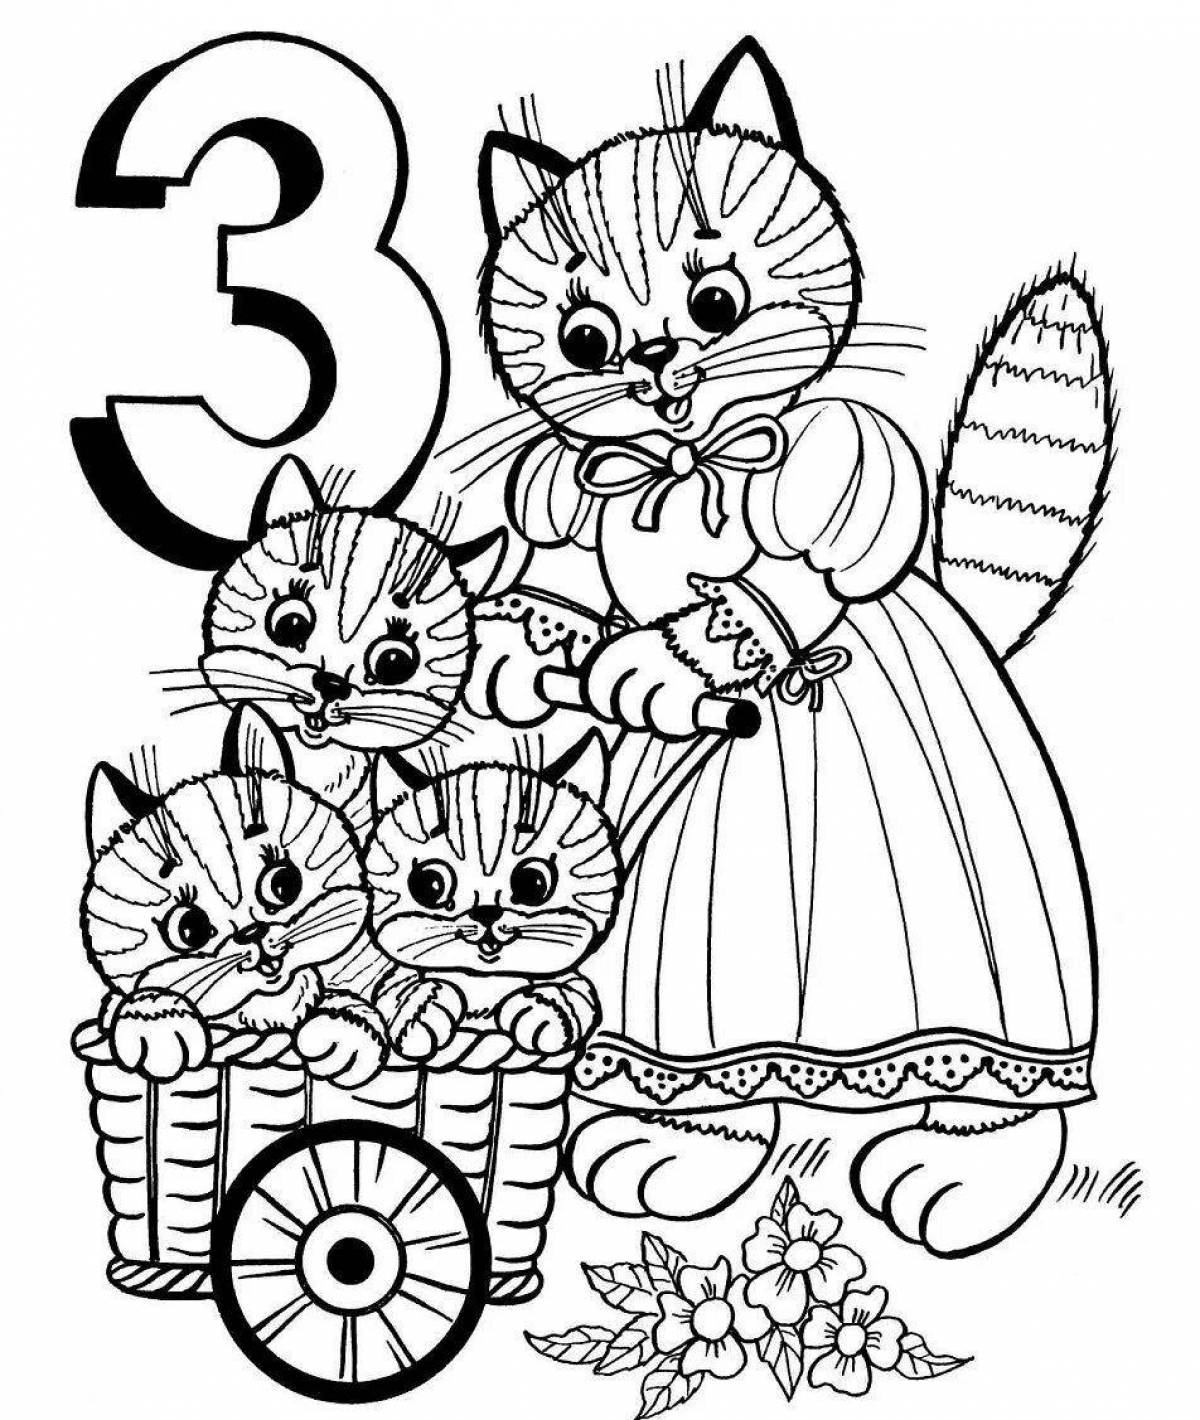 A wonderful coloring book for children 8-9 years old